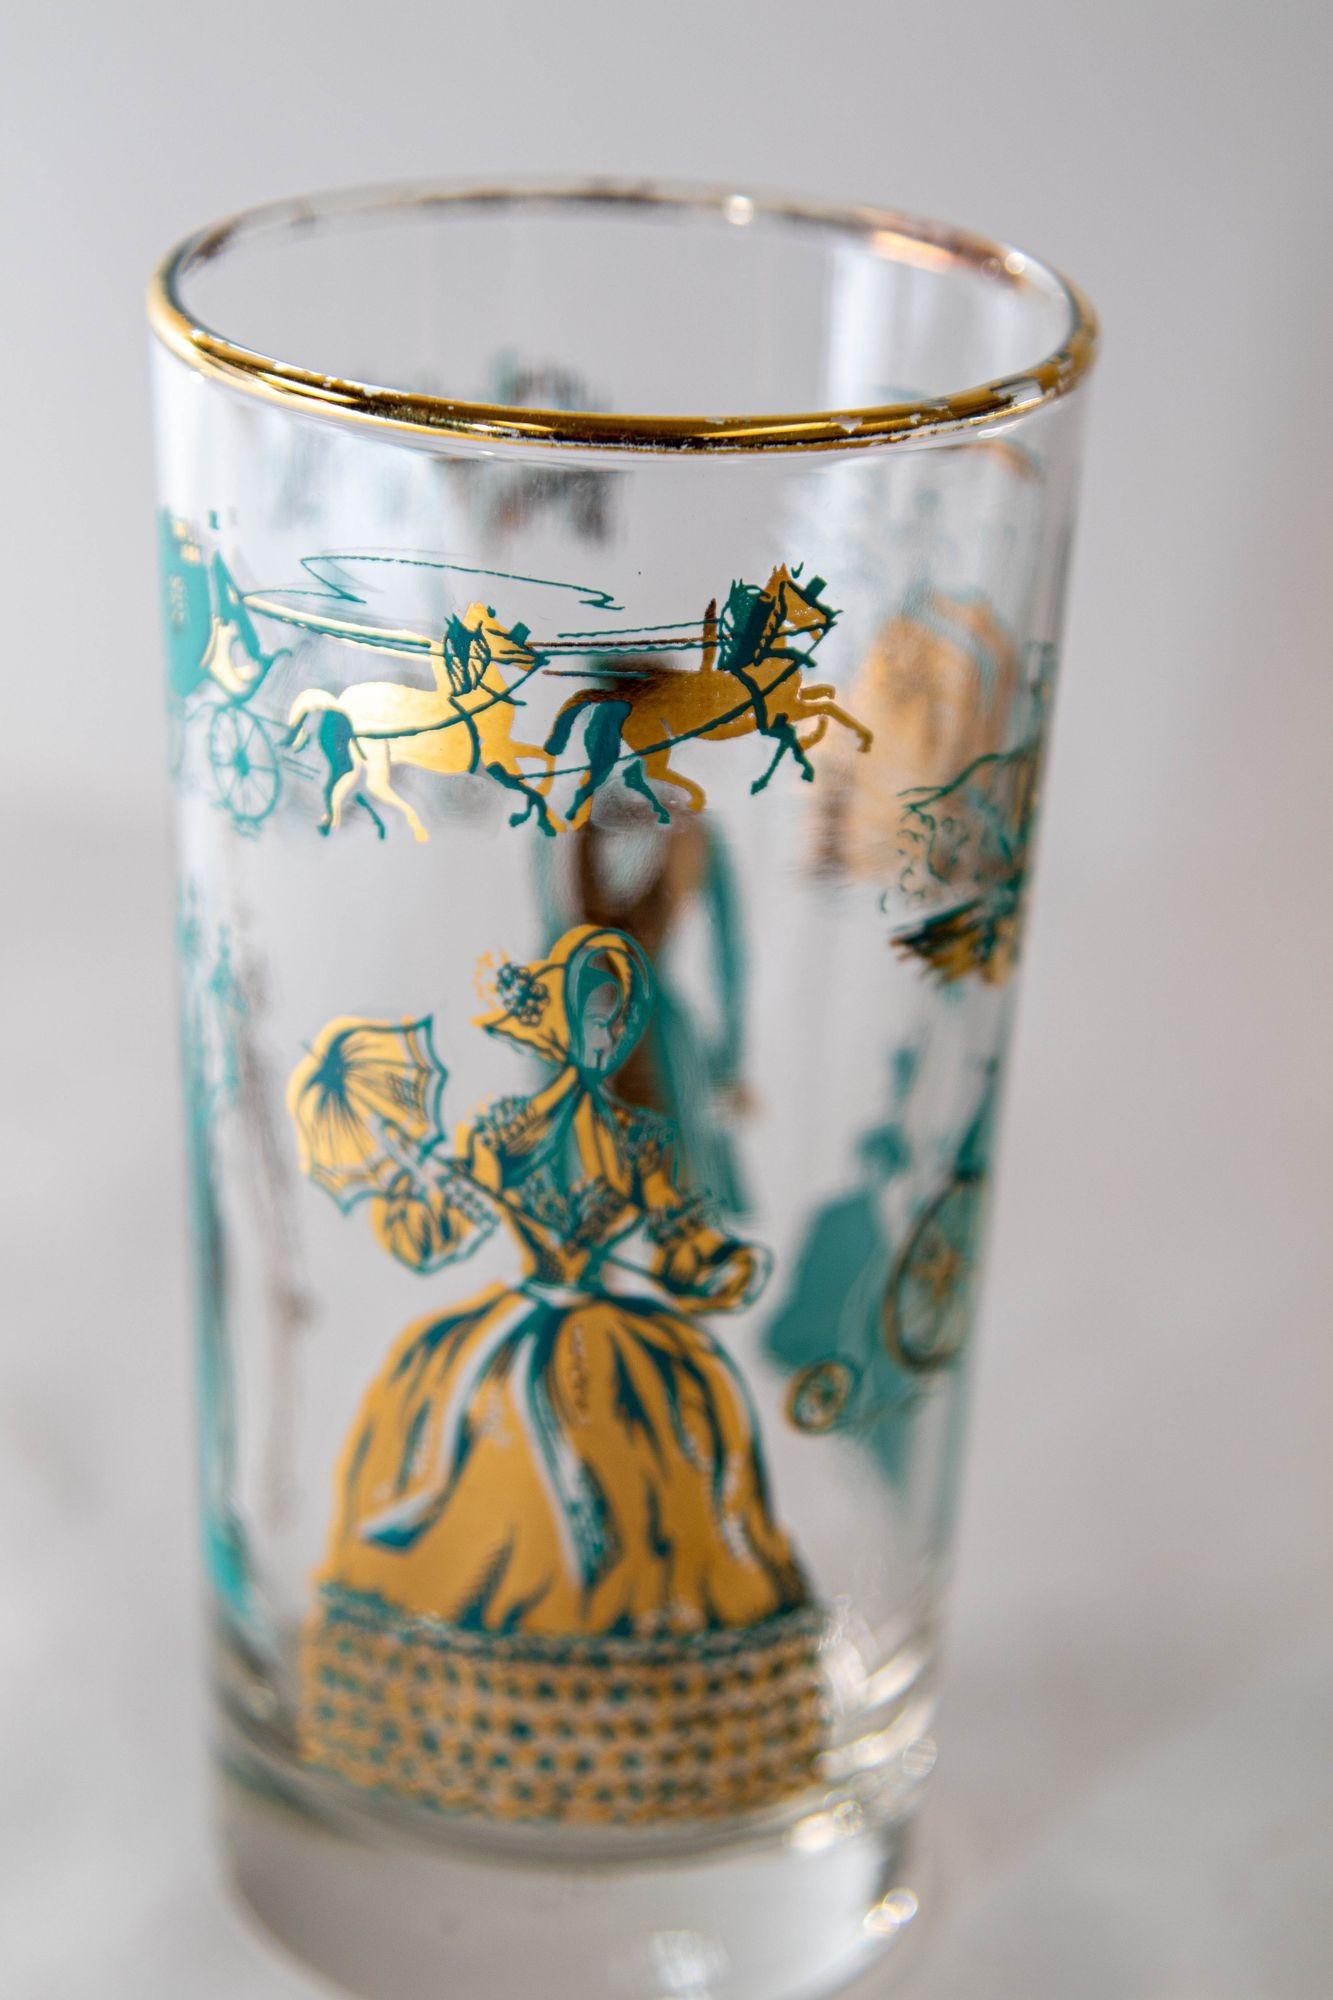 American Vintage Turquoise and Gold Highball Barware Glasses Set of 8, circa 1960